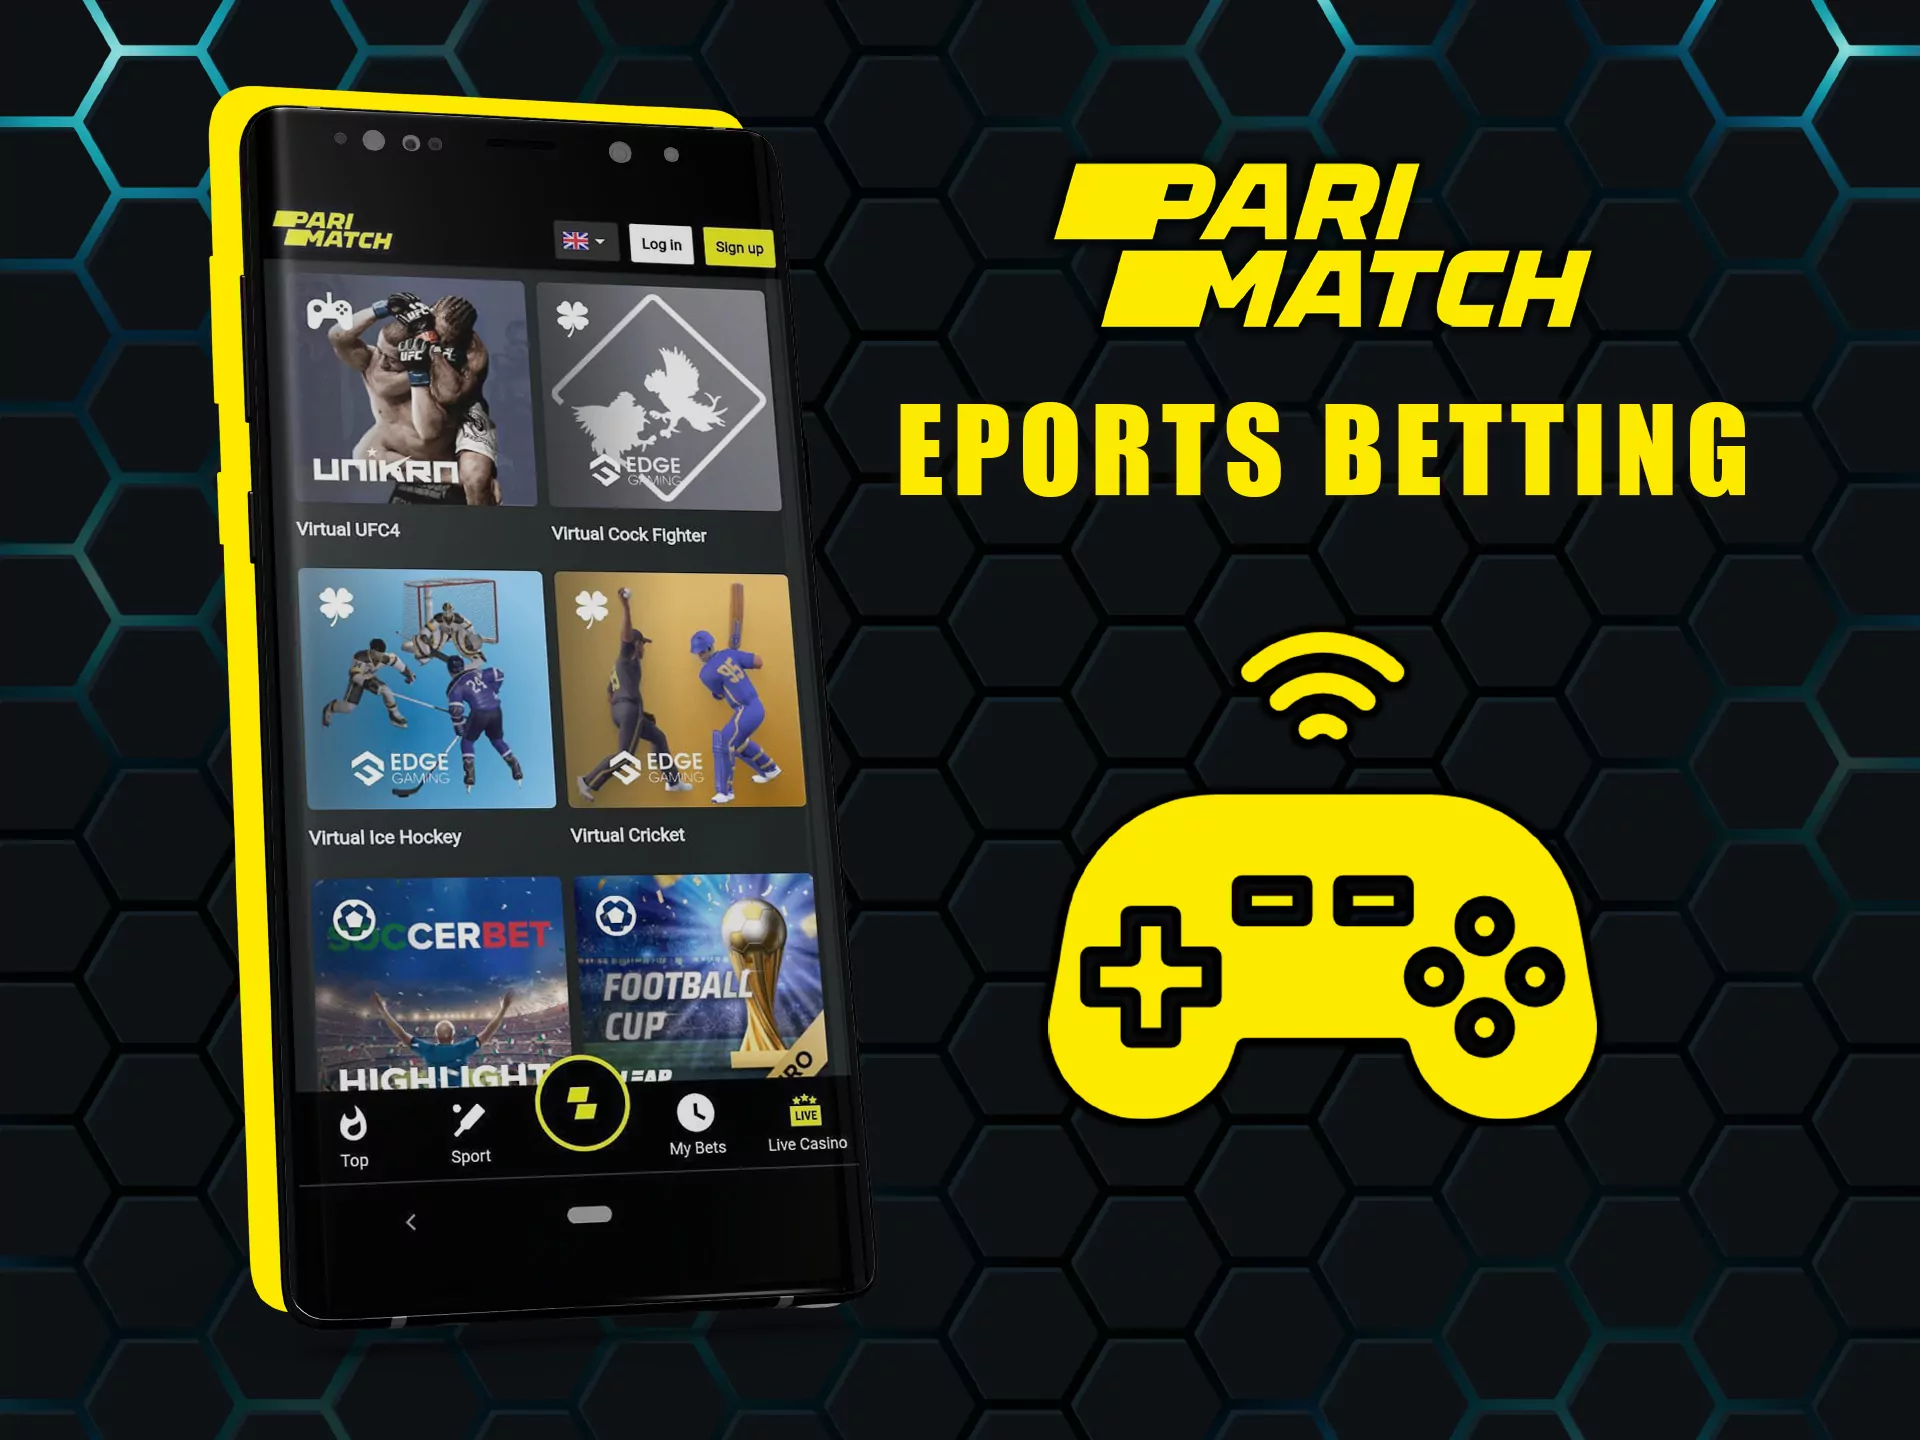 Esports matches are also a popular section for betting.